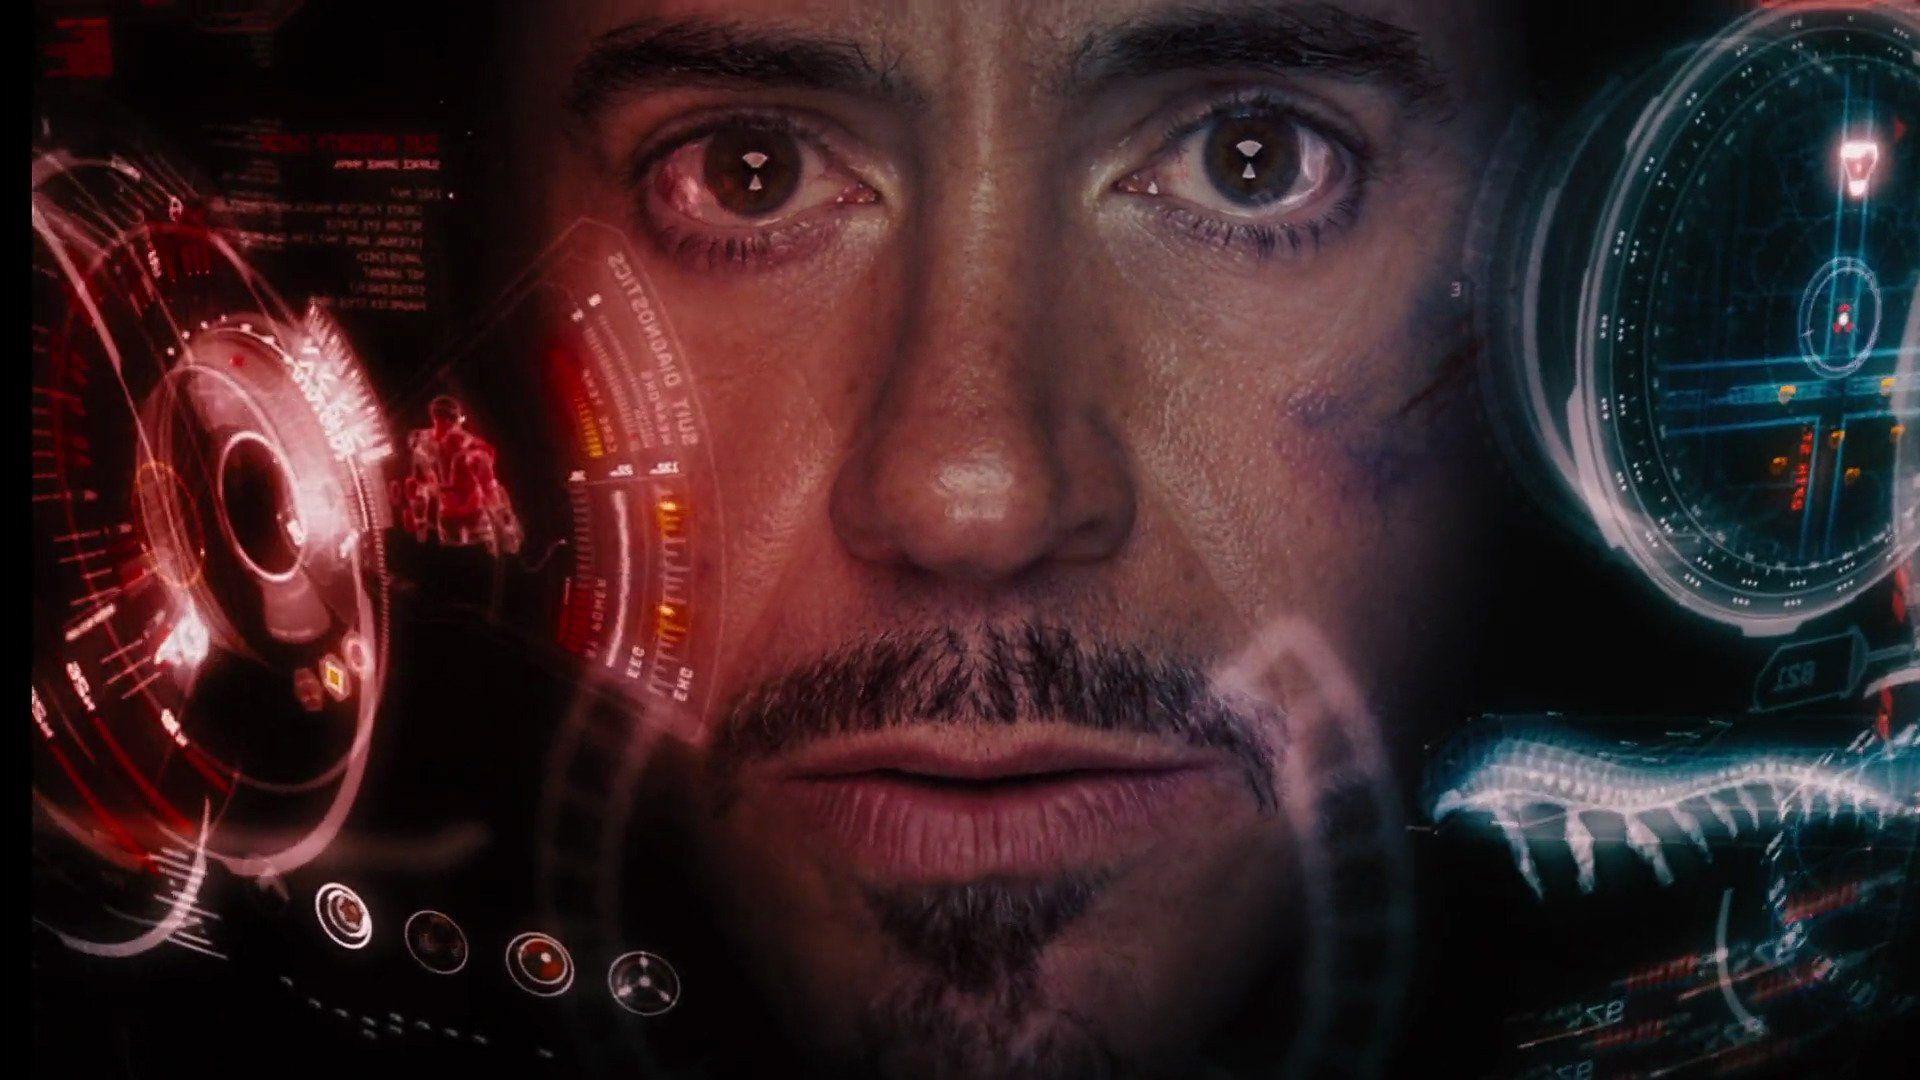 Iron Man 4 Probaby Not in the Cards, According to Robert Downey Jr